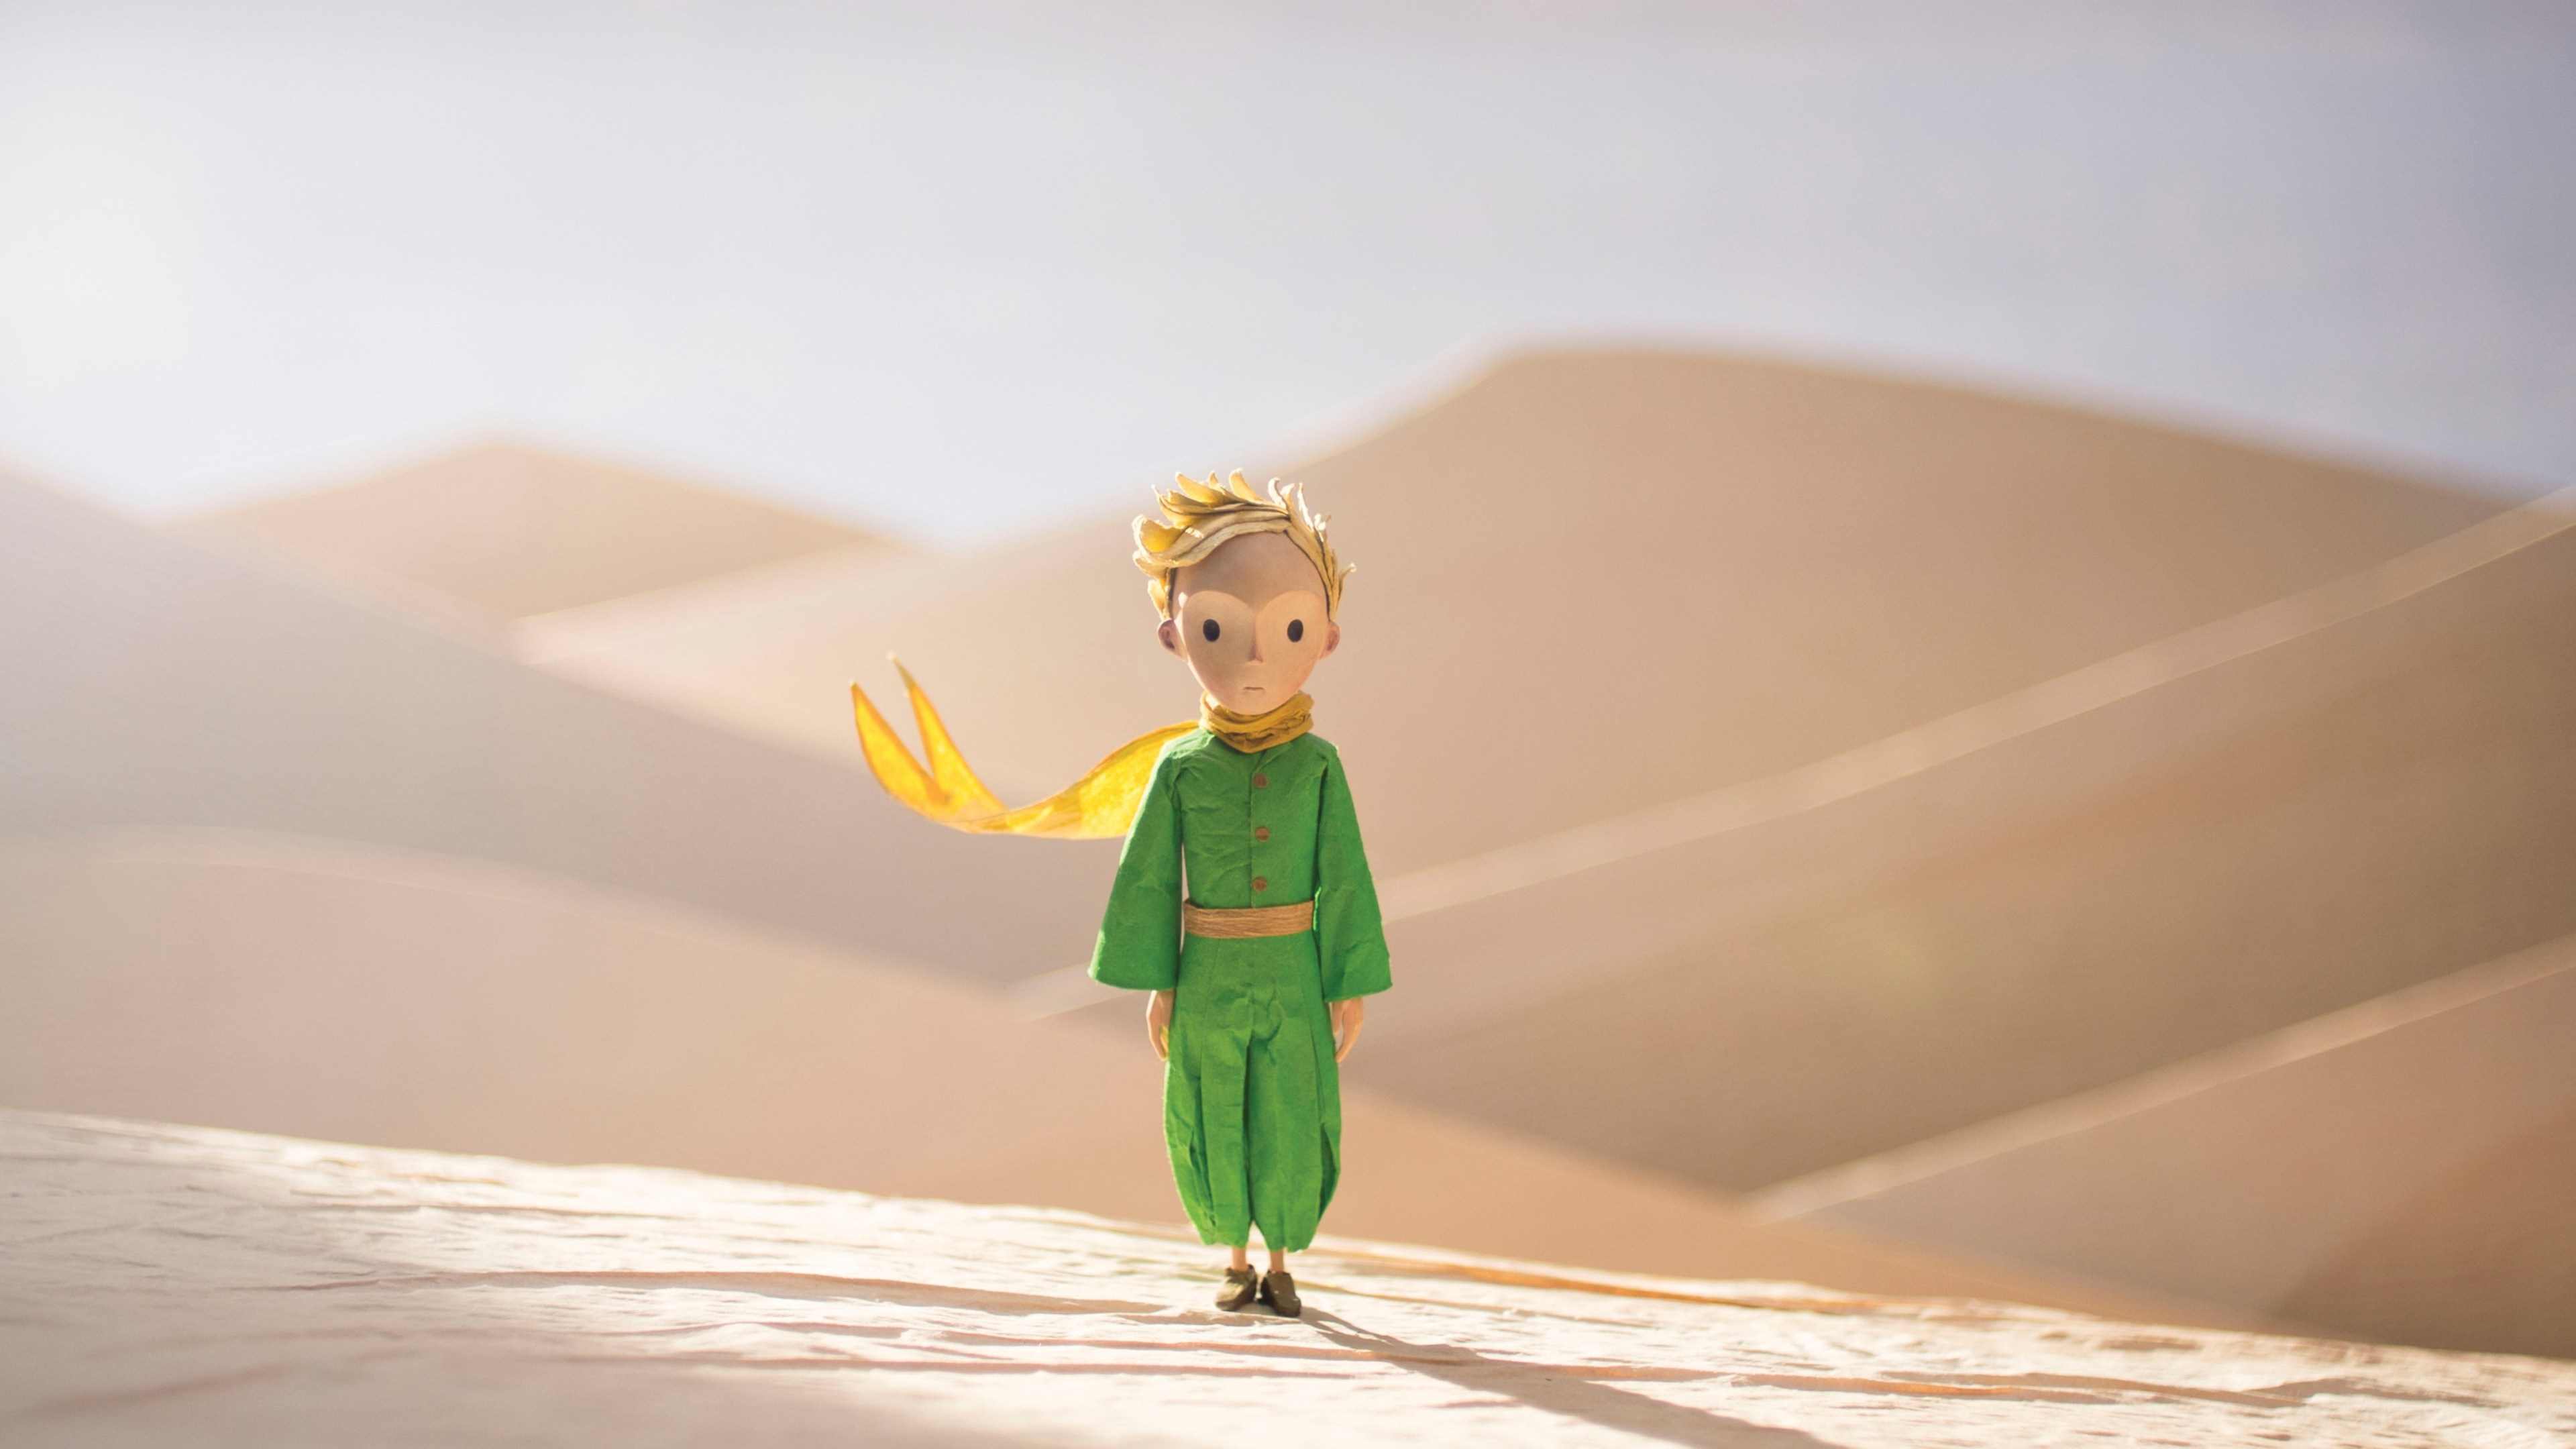 The Little Prince In The Desert